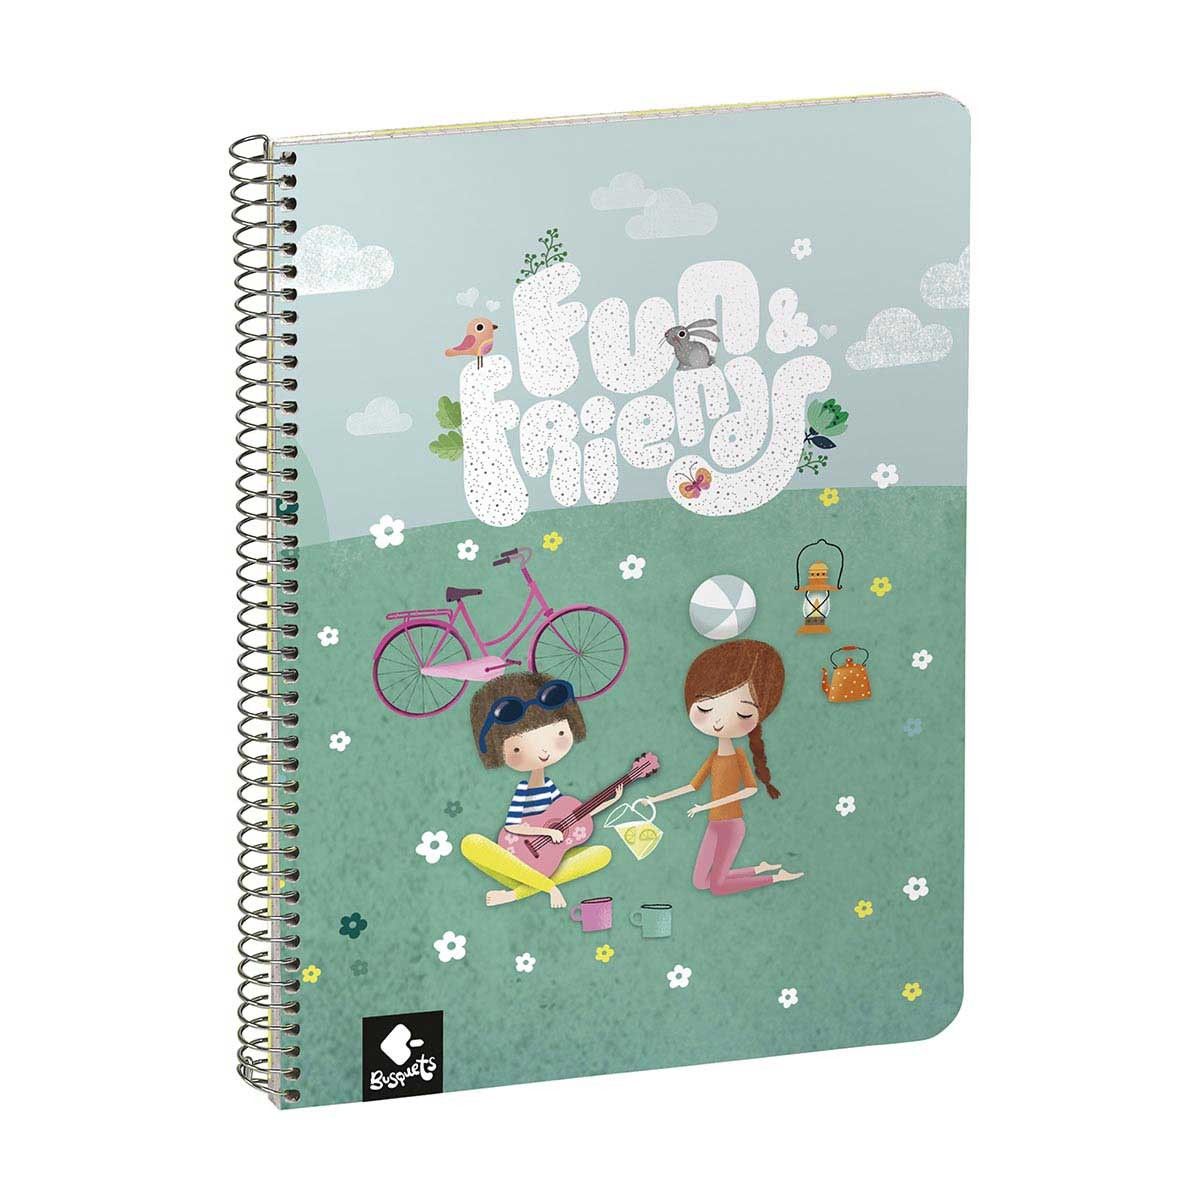 FRIENDS NOTE BOOK A5 LINED 80 SHEETS 14.8X21CM